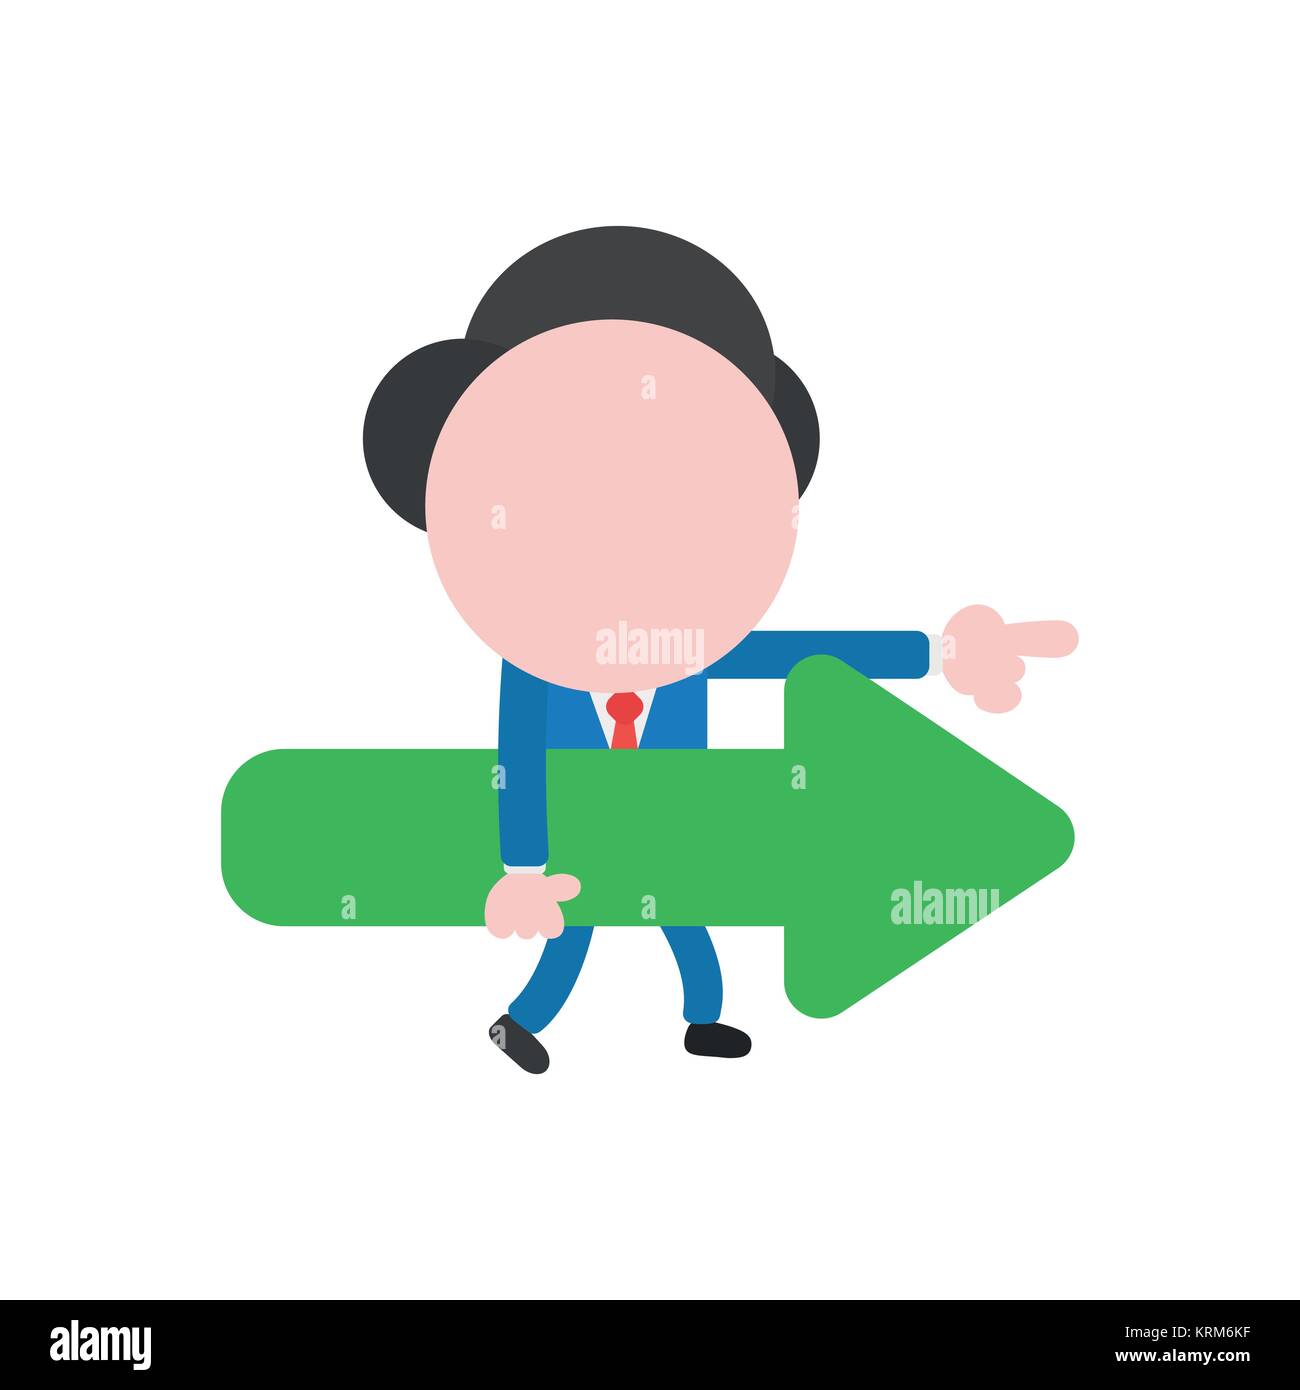 Vector cartoon illustration concept of faceless businessman mascot character walking, carrying green arrow symbol icon pointing right. Stock Vector